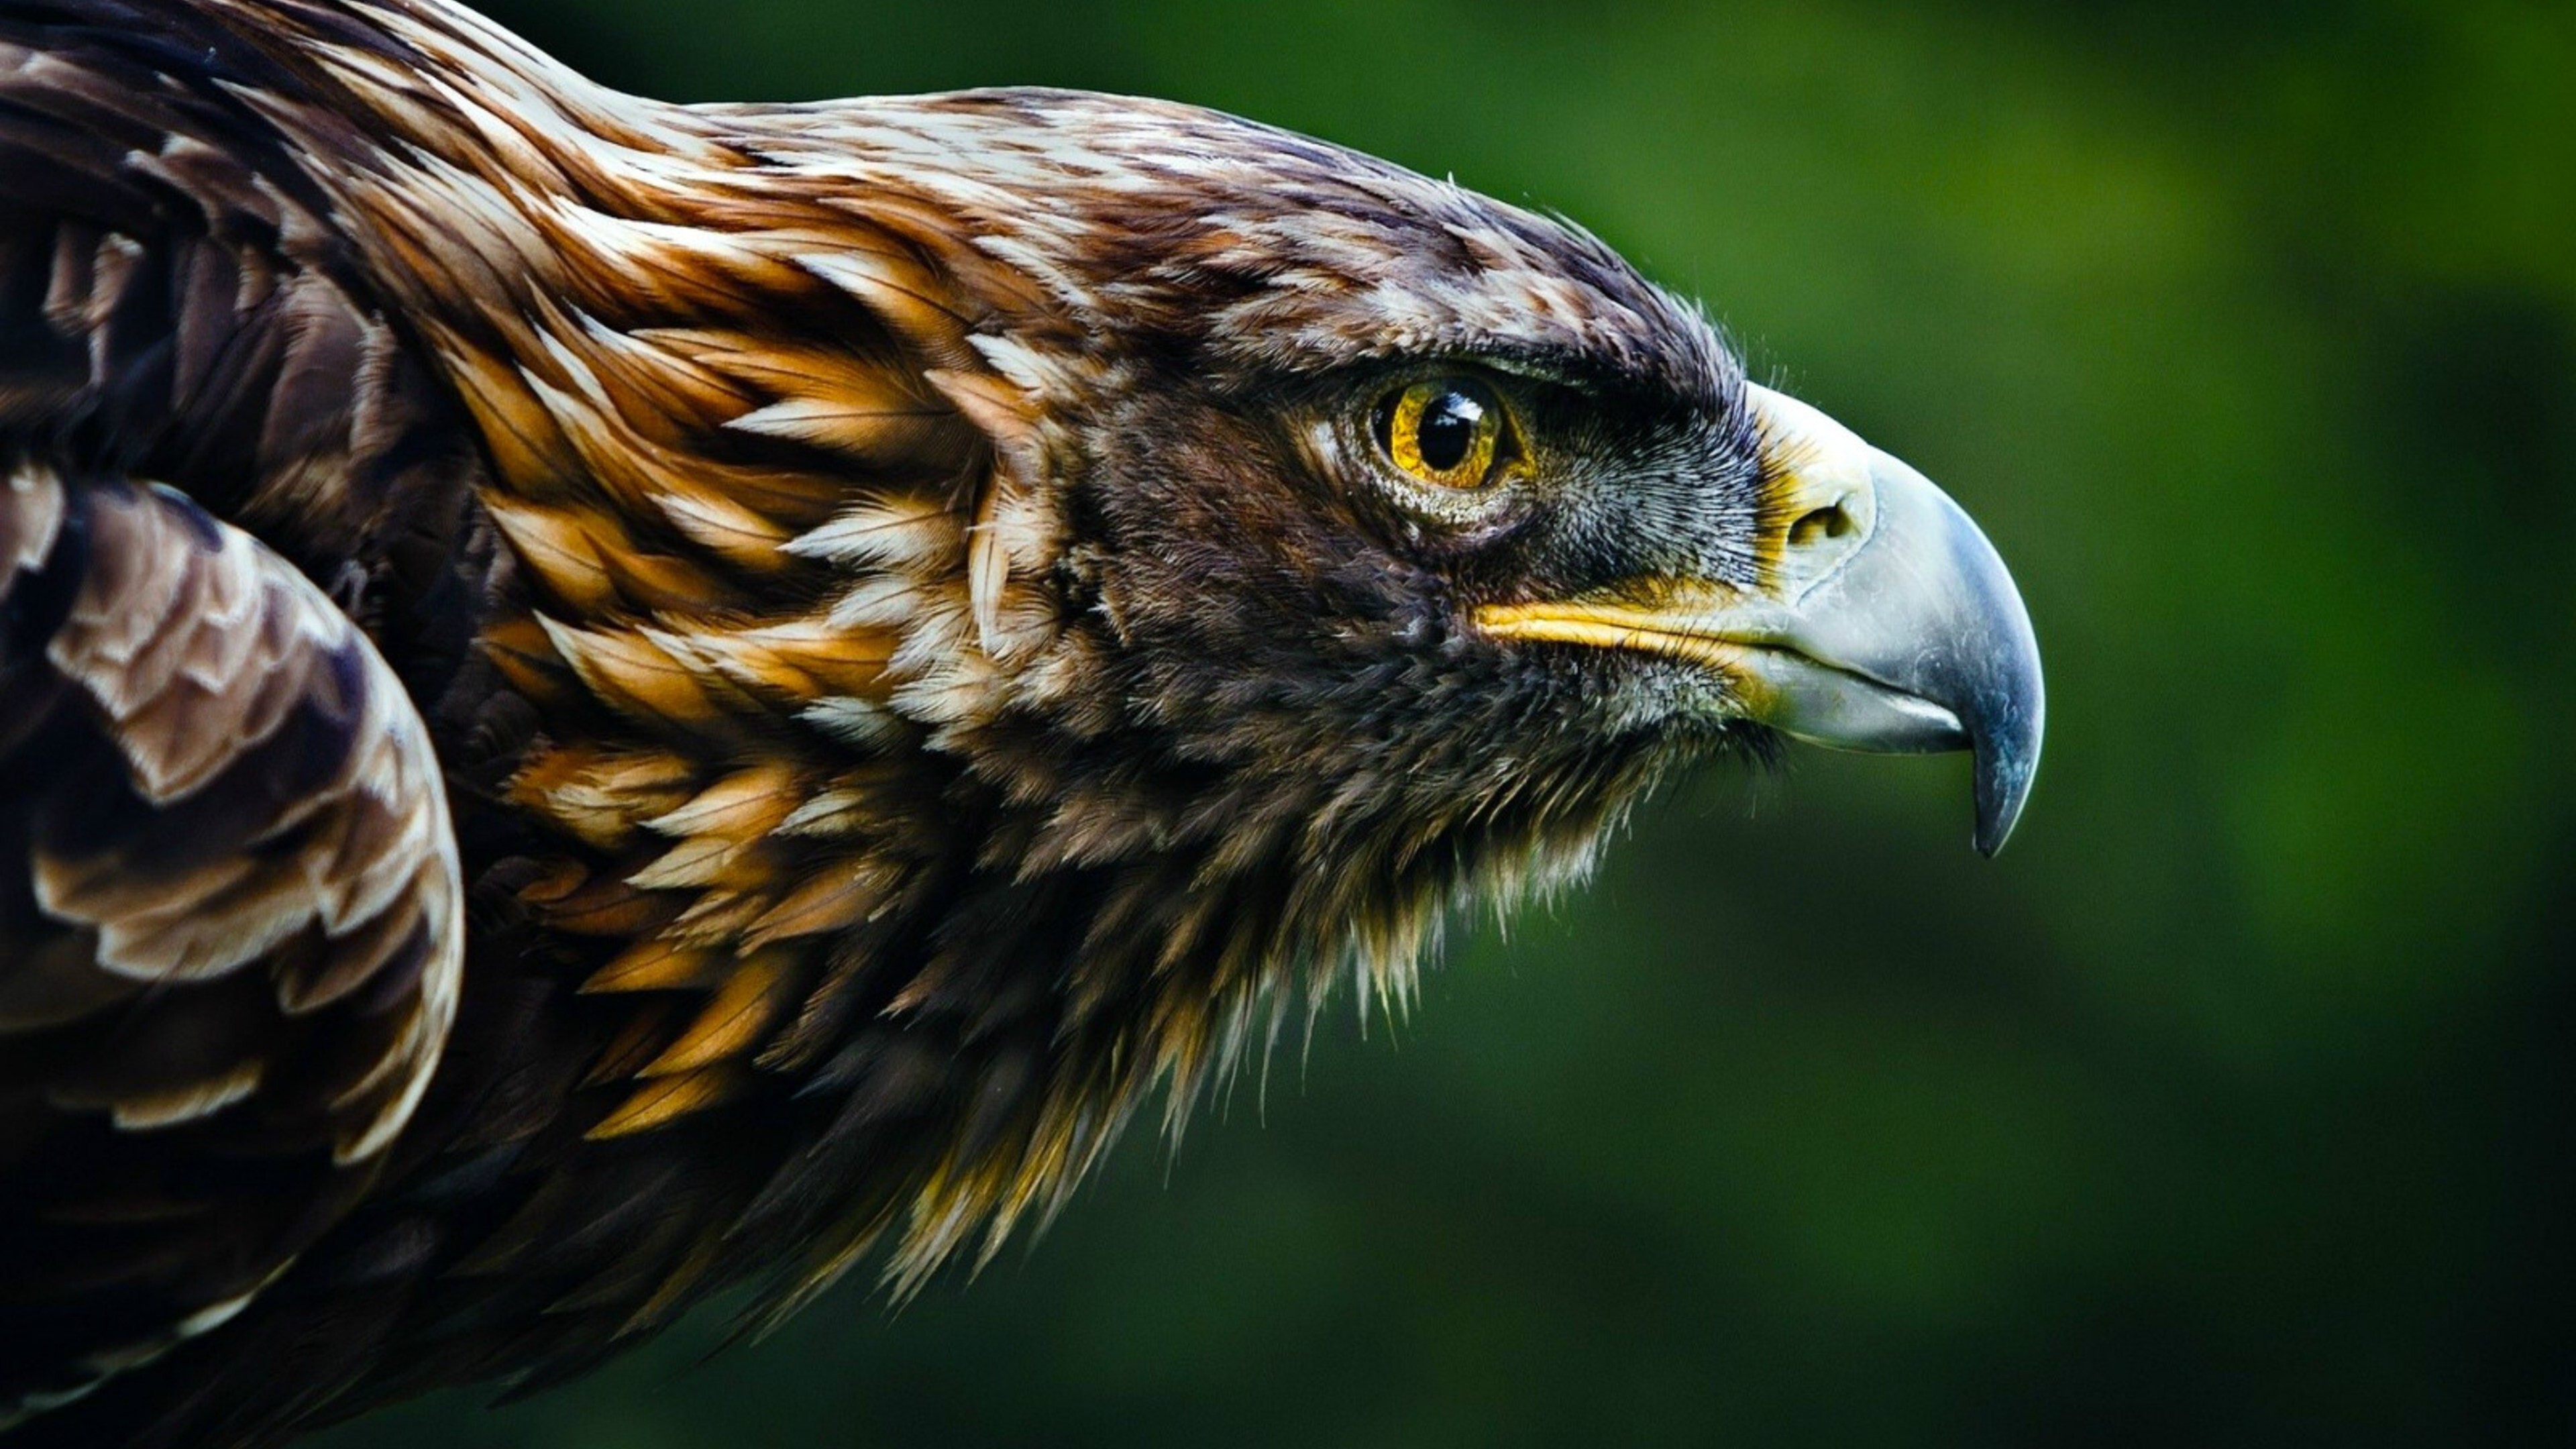 Golden Eagle: A very large raptor, 66 to 102 centimeters in length, The bird's head, Hooked beak. 3840x2160 4K Wallpaper.